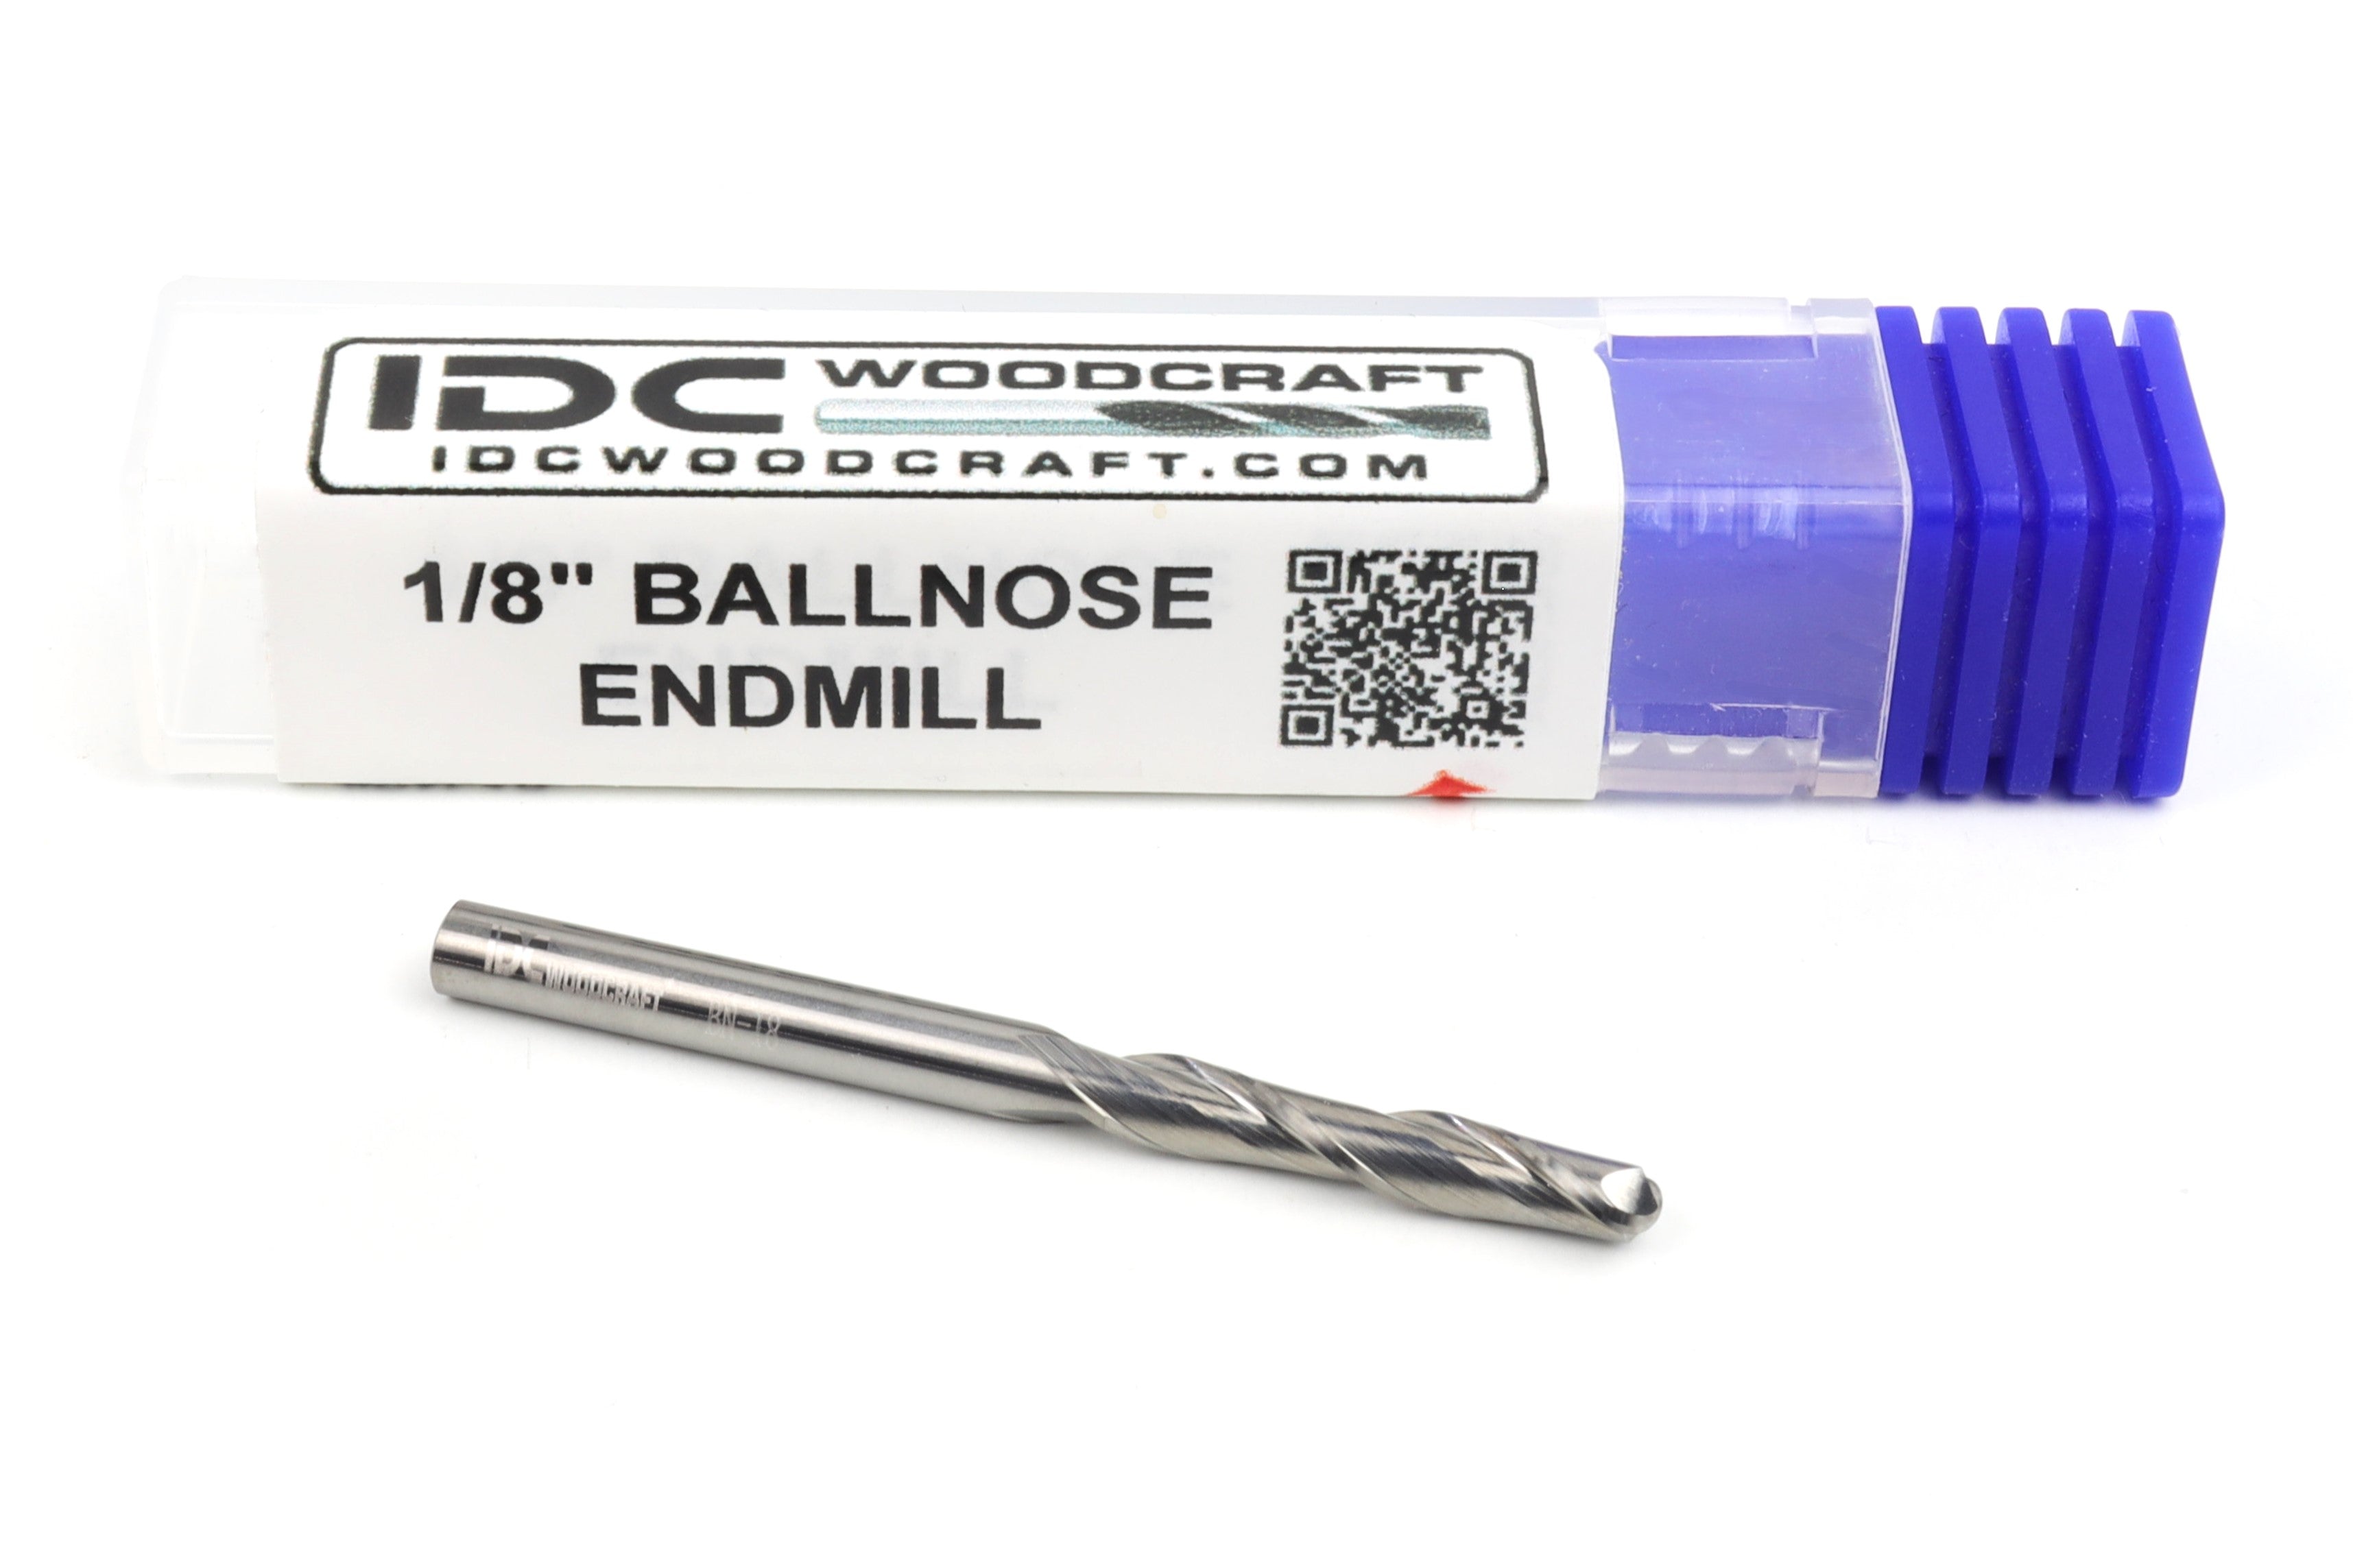 1/8" Ball Nose Endmill Bit For 3D Carving, 1/8" Shank